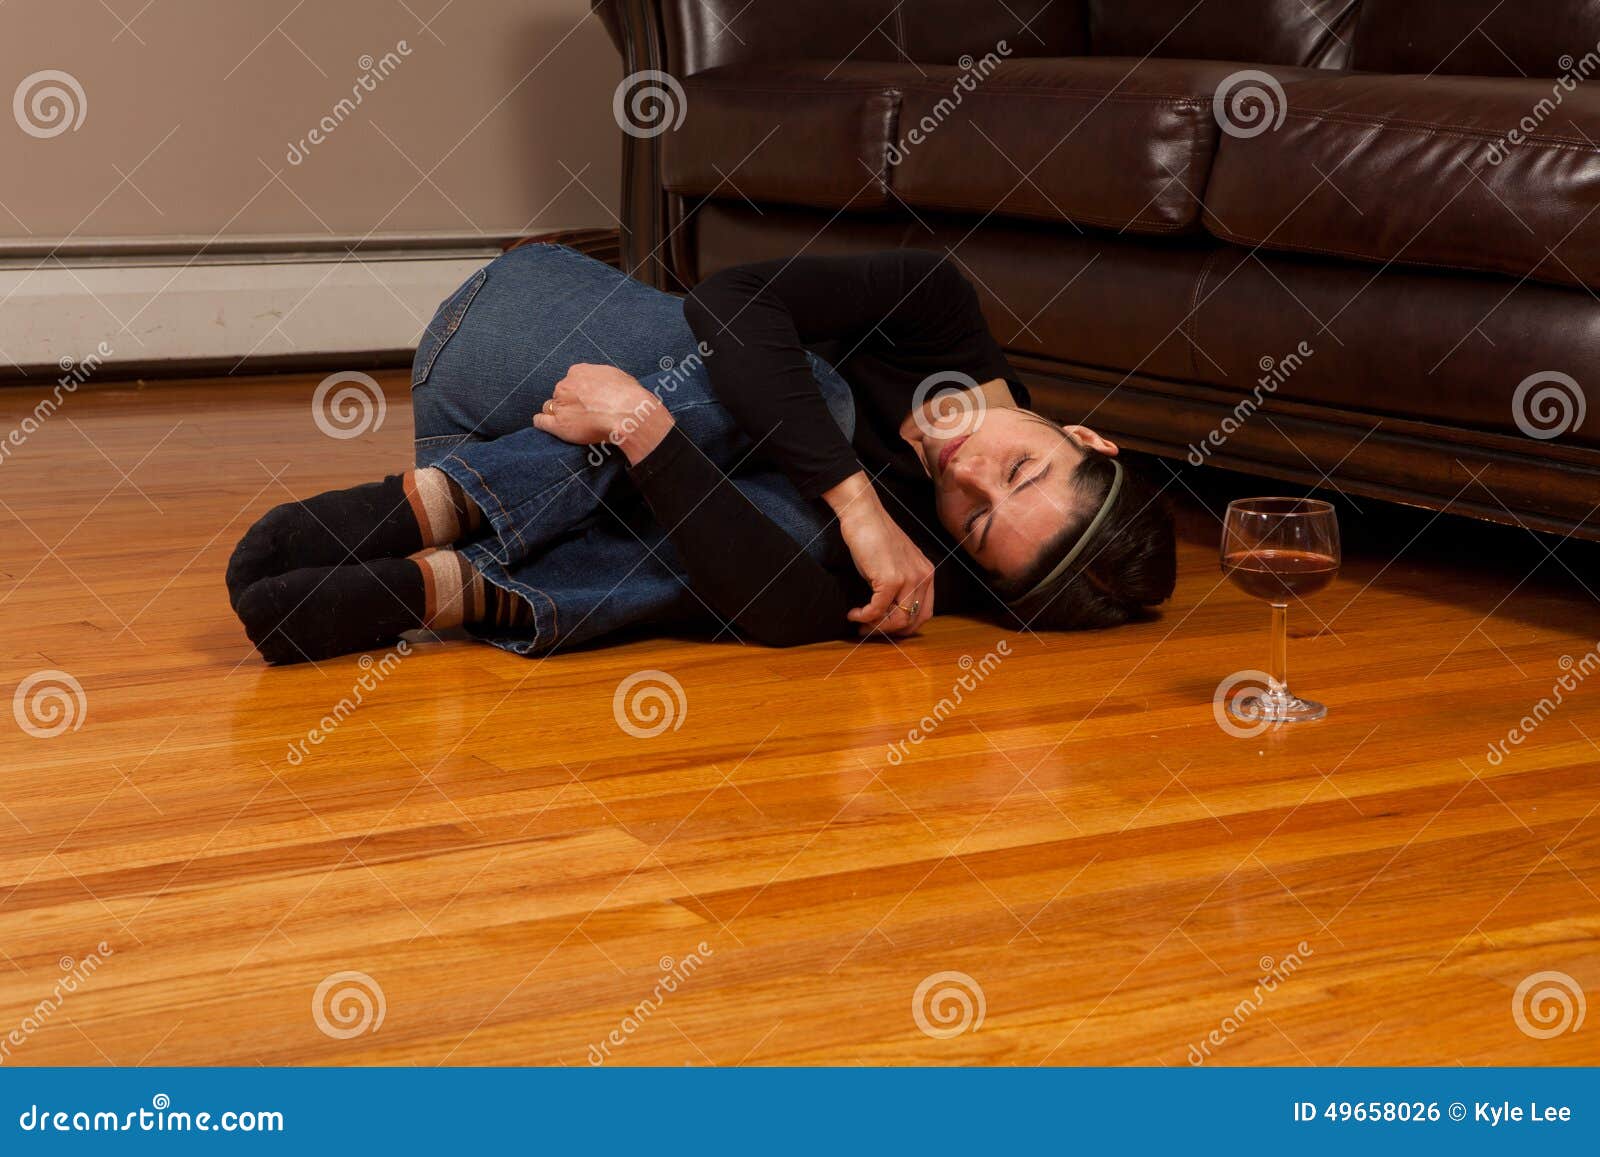 Alcohol Abuse stock photo. Image of depression, person - 49658026